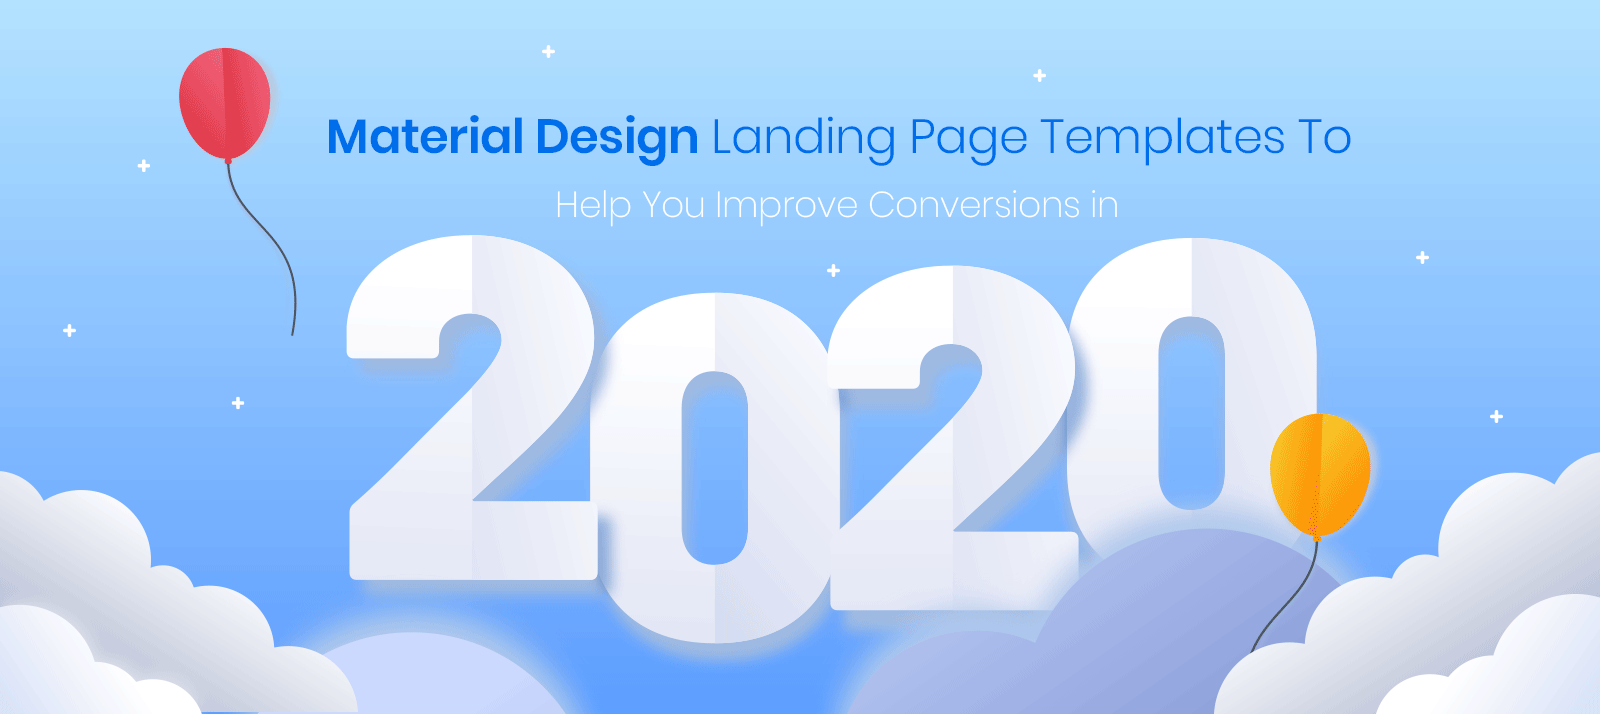  Material Design Landing Page Templates To Help You Improve